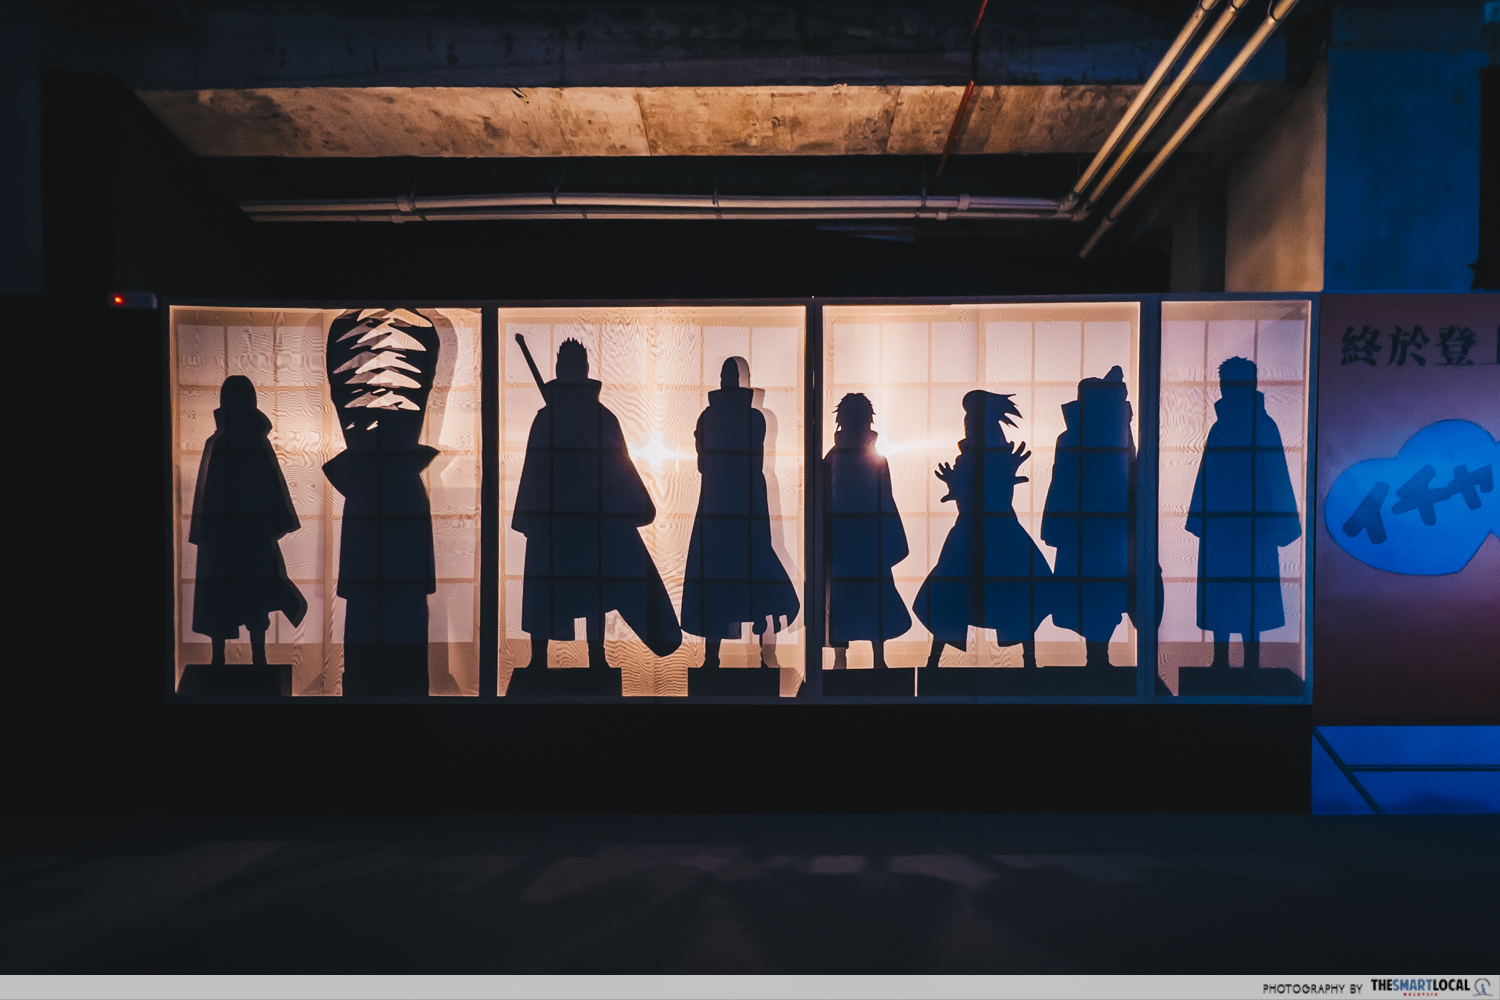 Naruto Exhibition in KL - character silhouettes